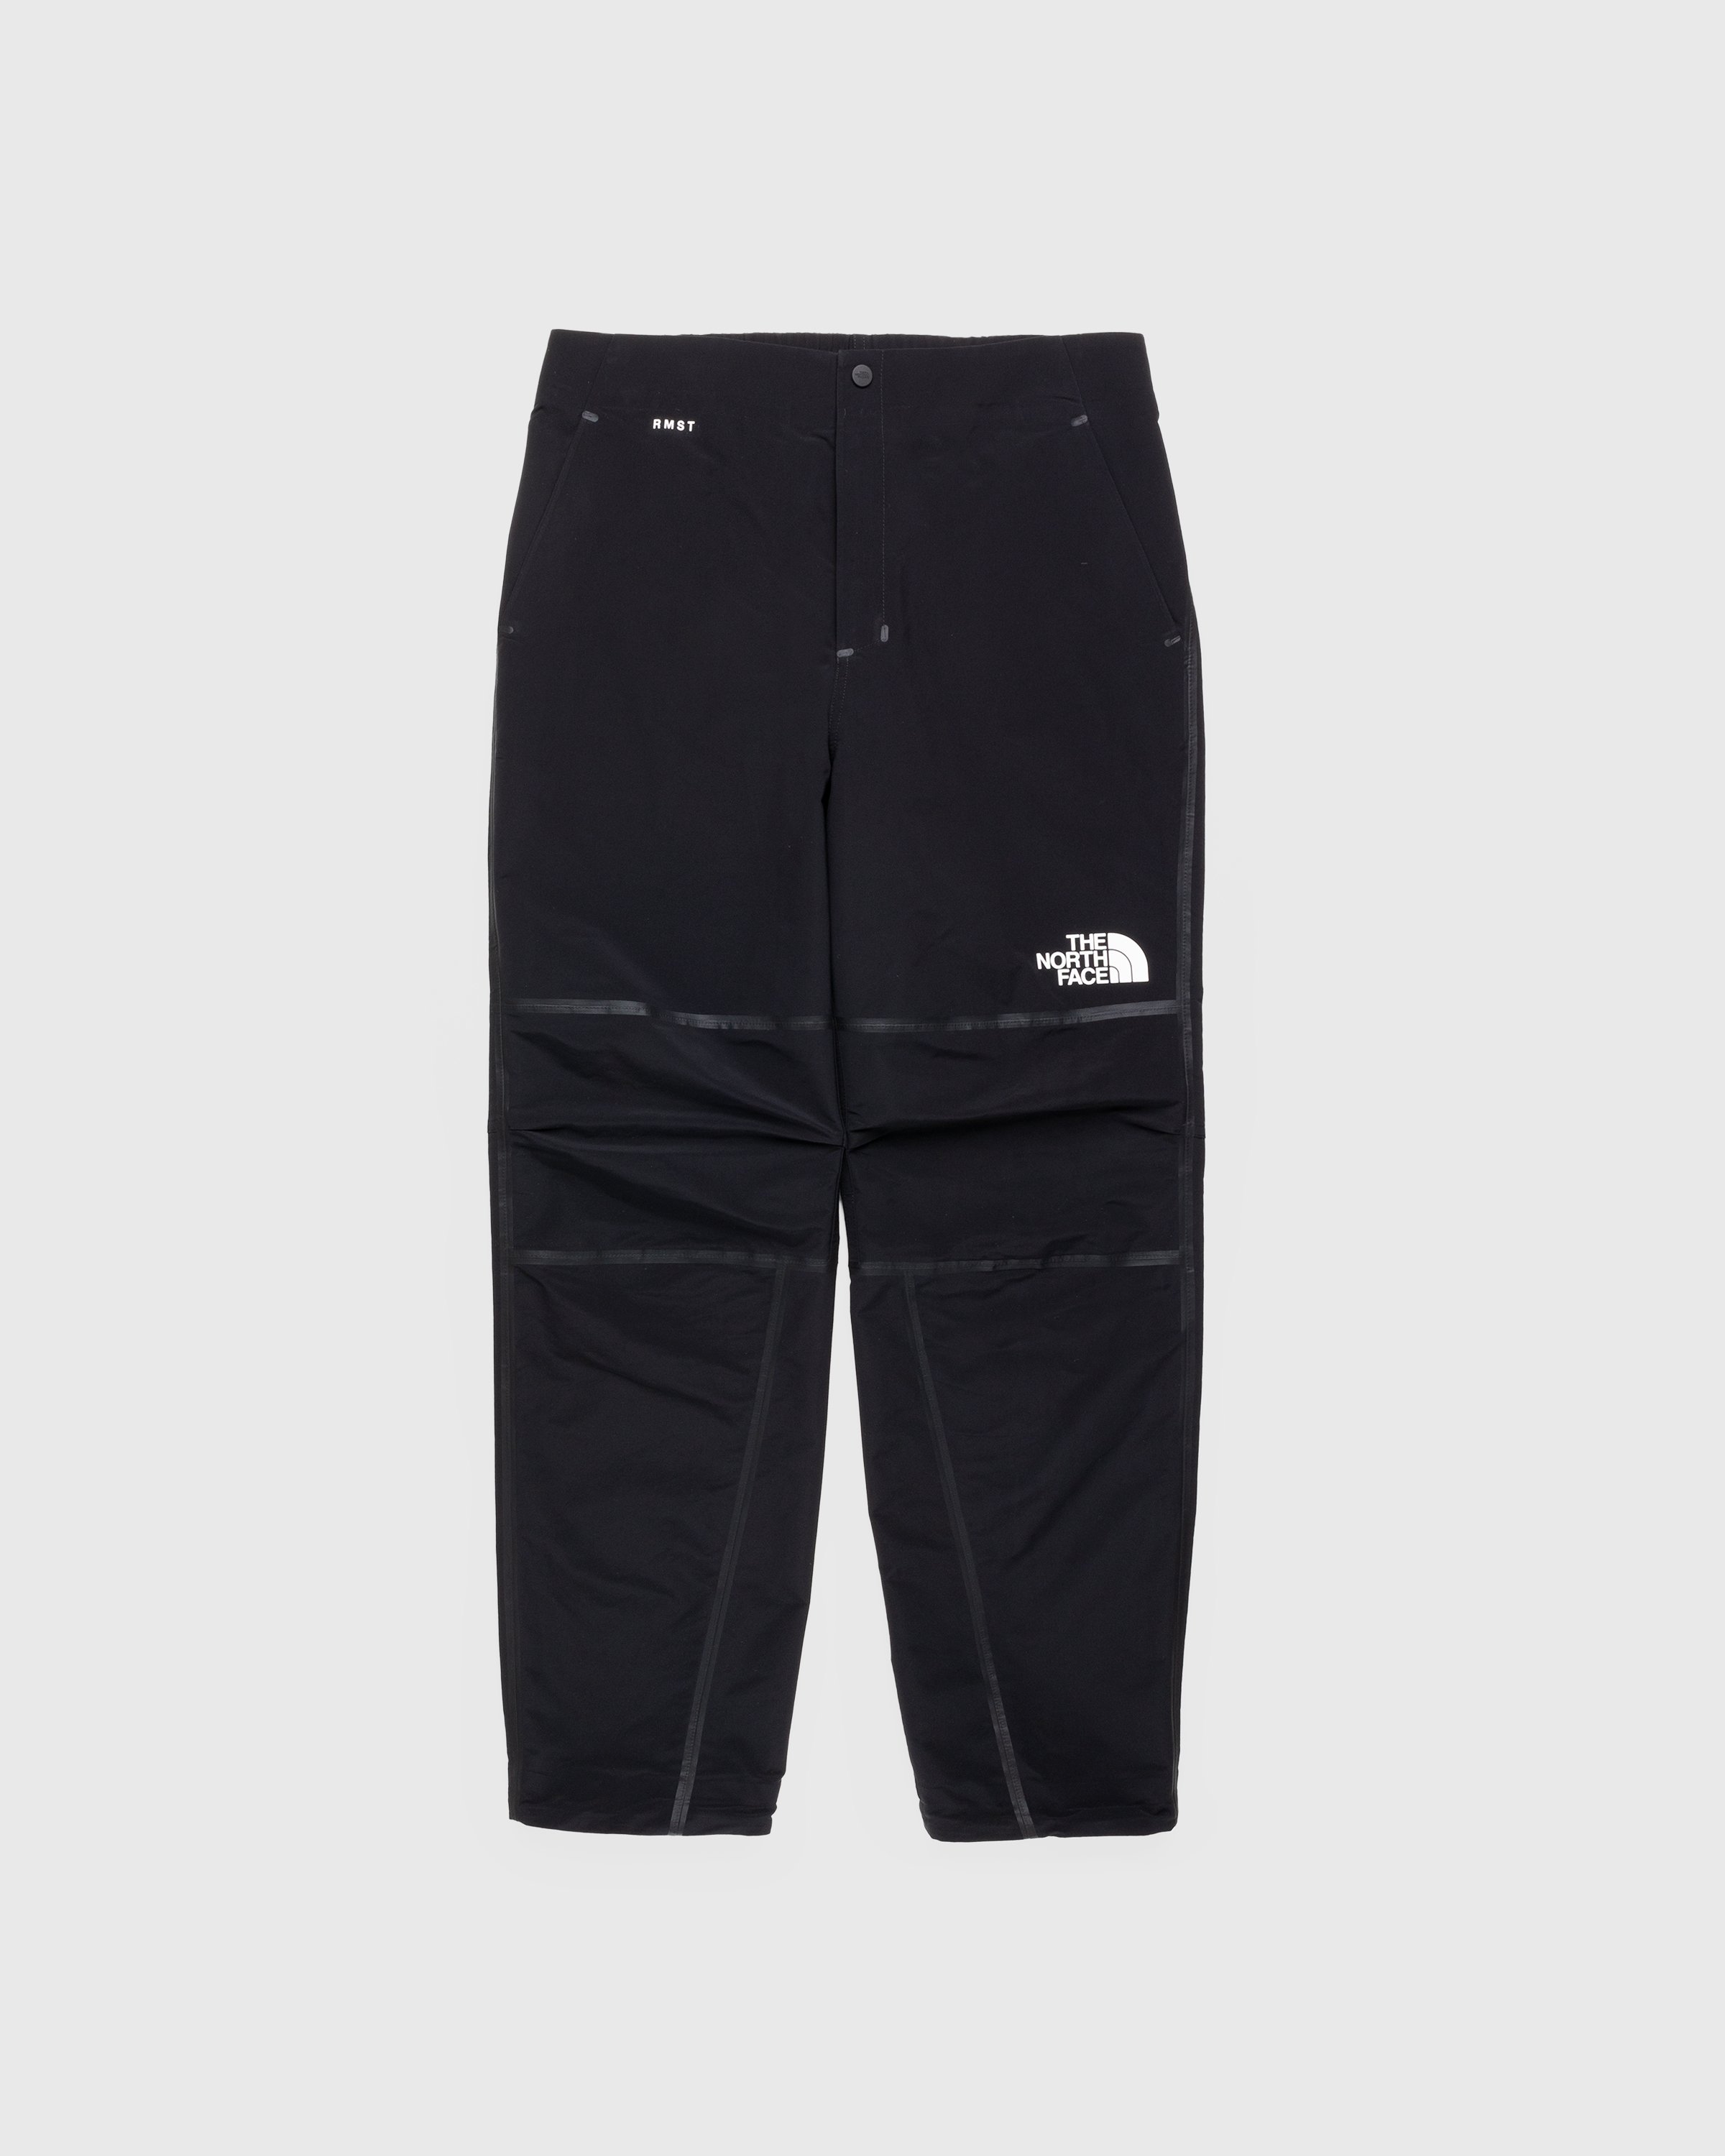 The North Face - RMST Mountain Pant Black - Clothing - Black - Image 1